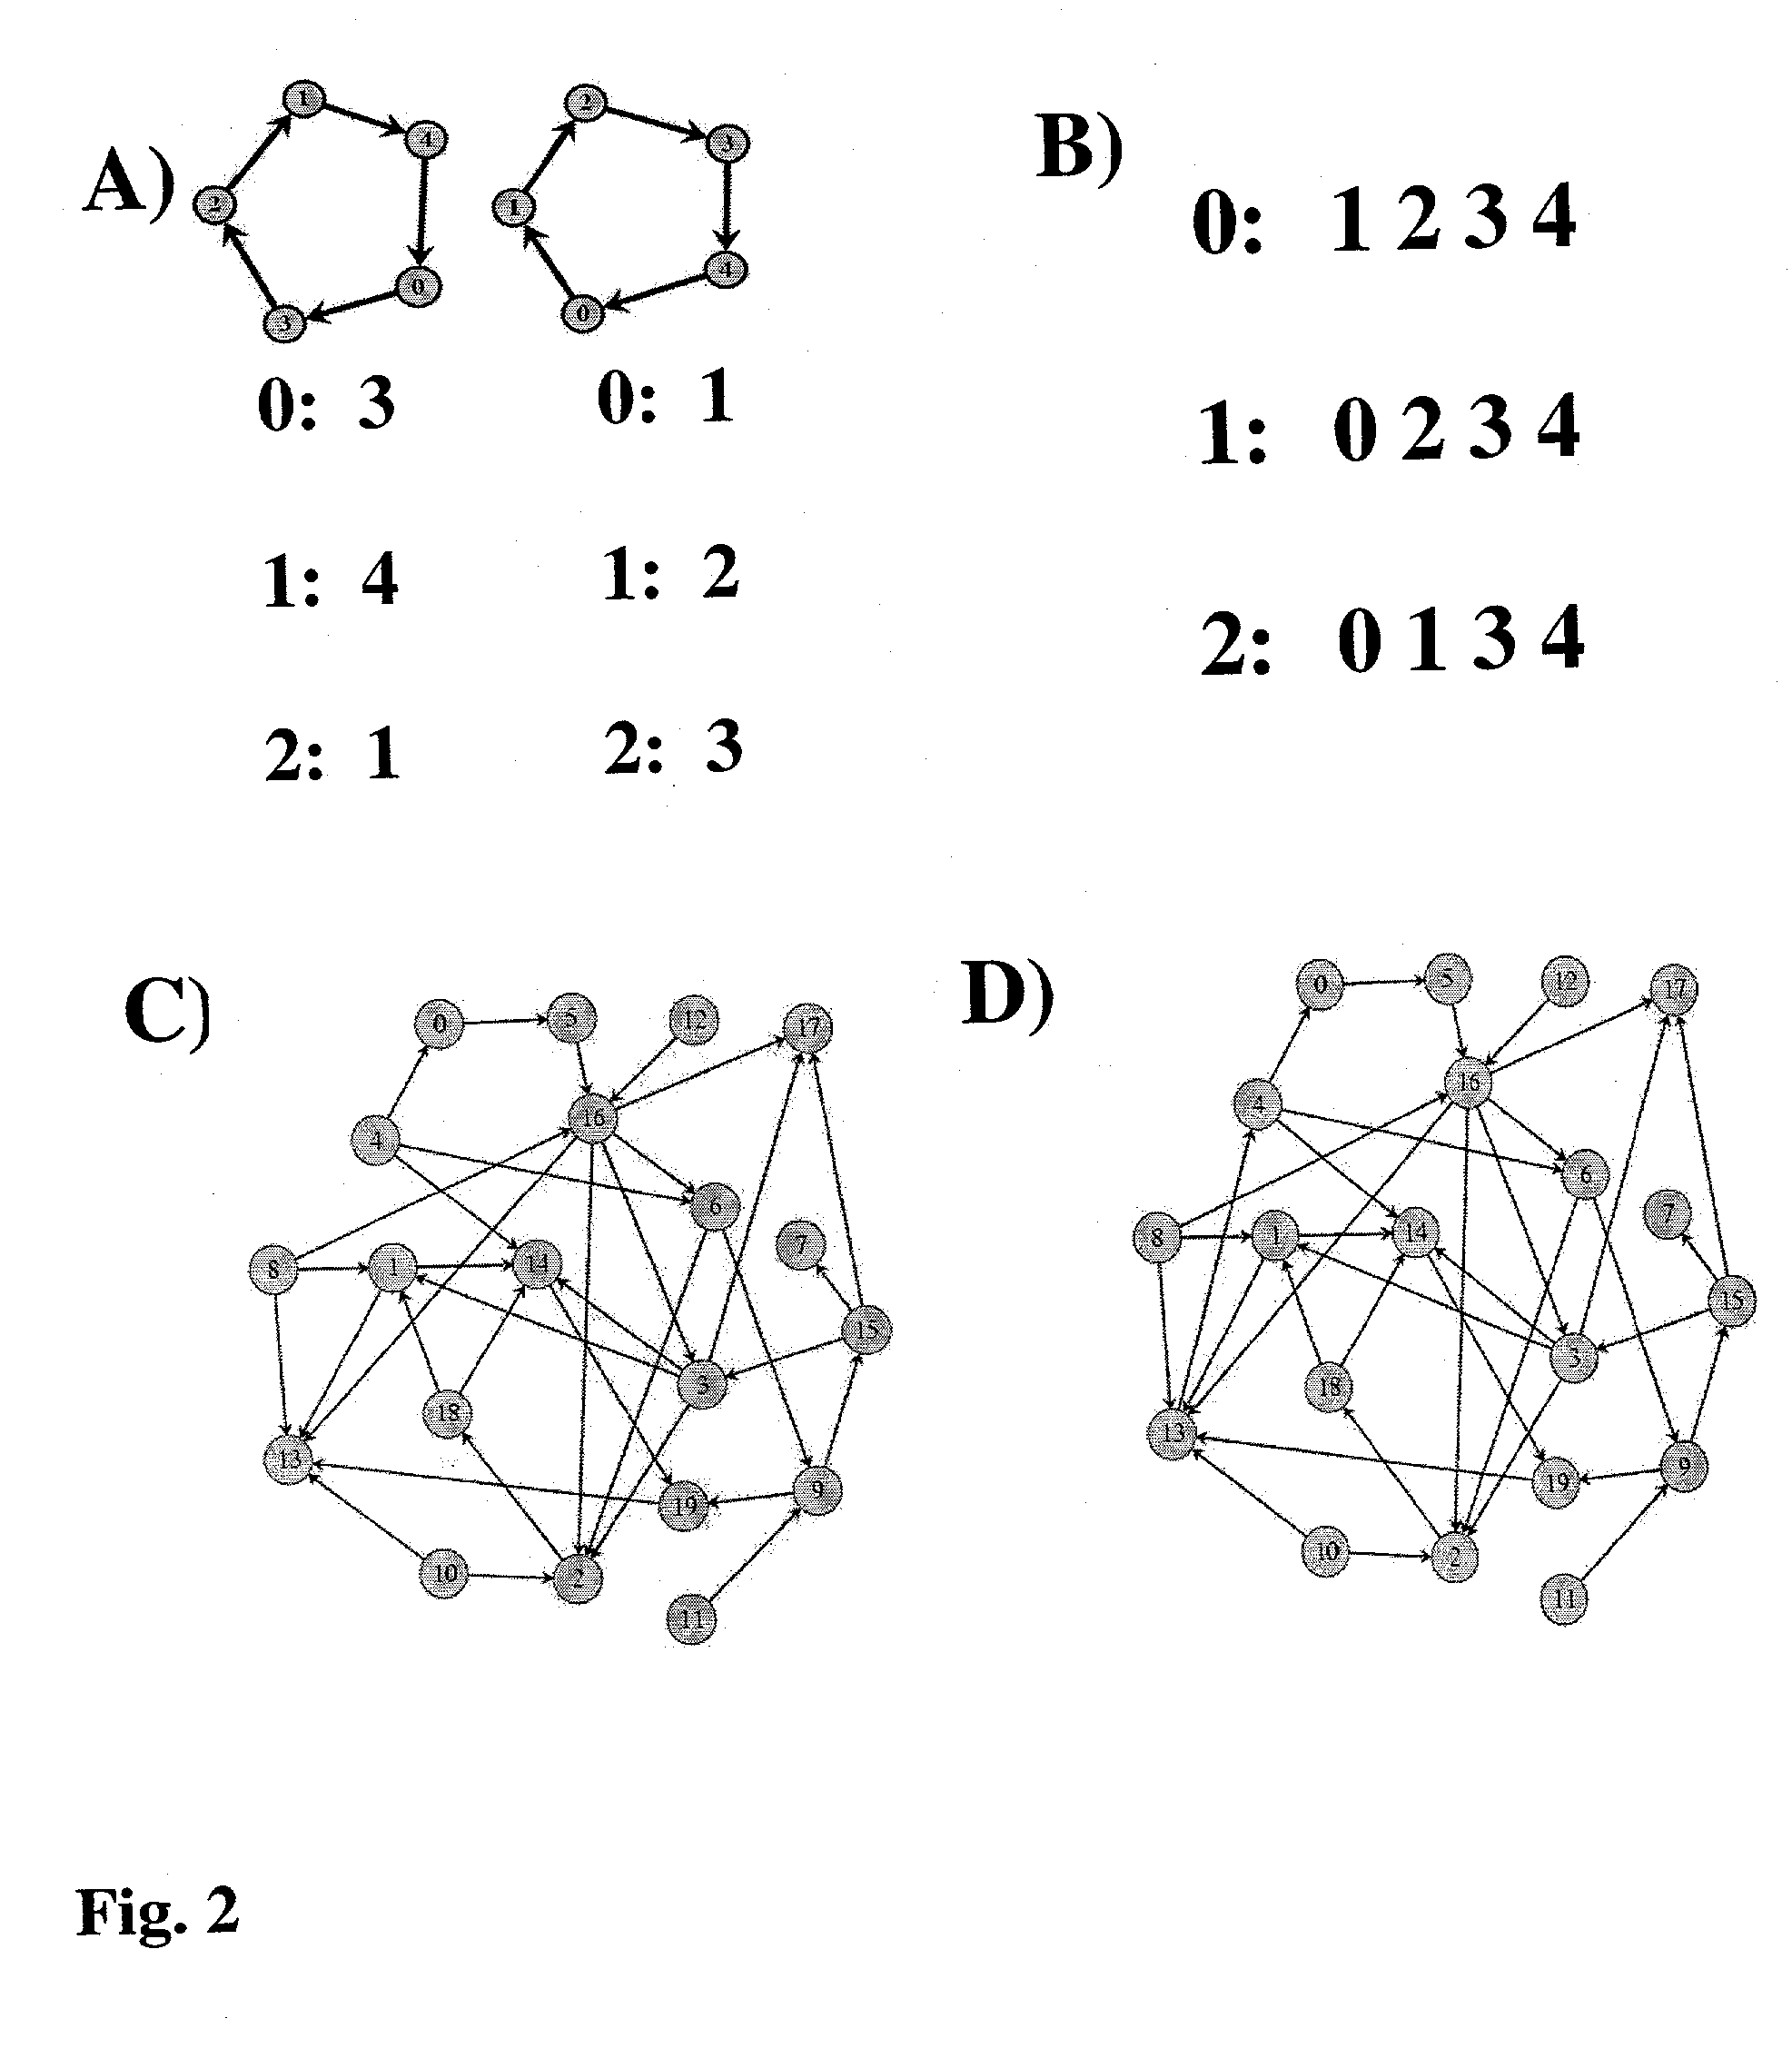 System and method for reconstructing pathways in large genetic networks from genetic perturbations